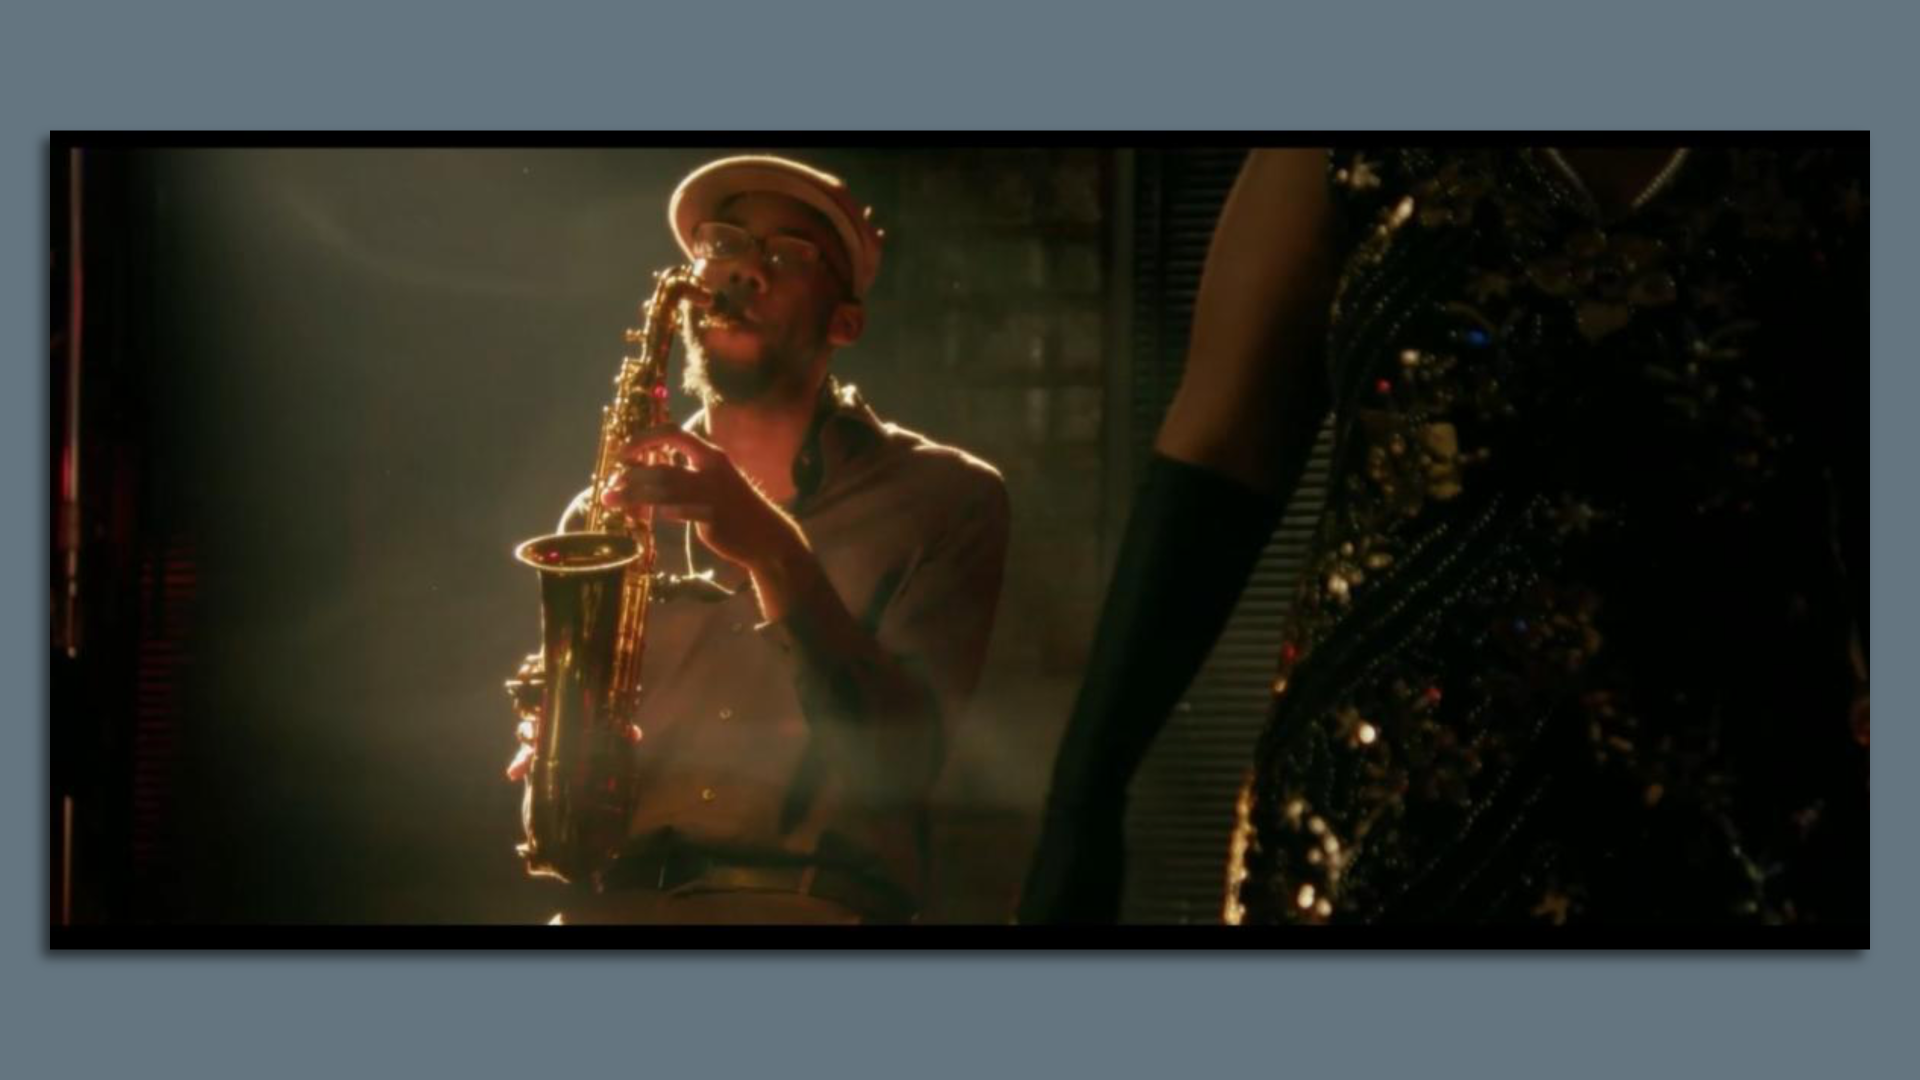 A photo of a saxophone player. 